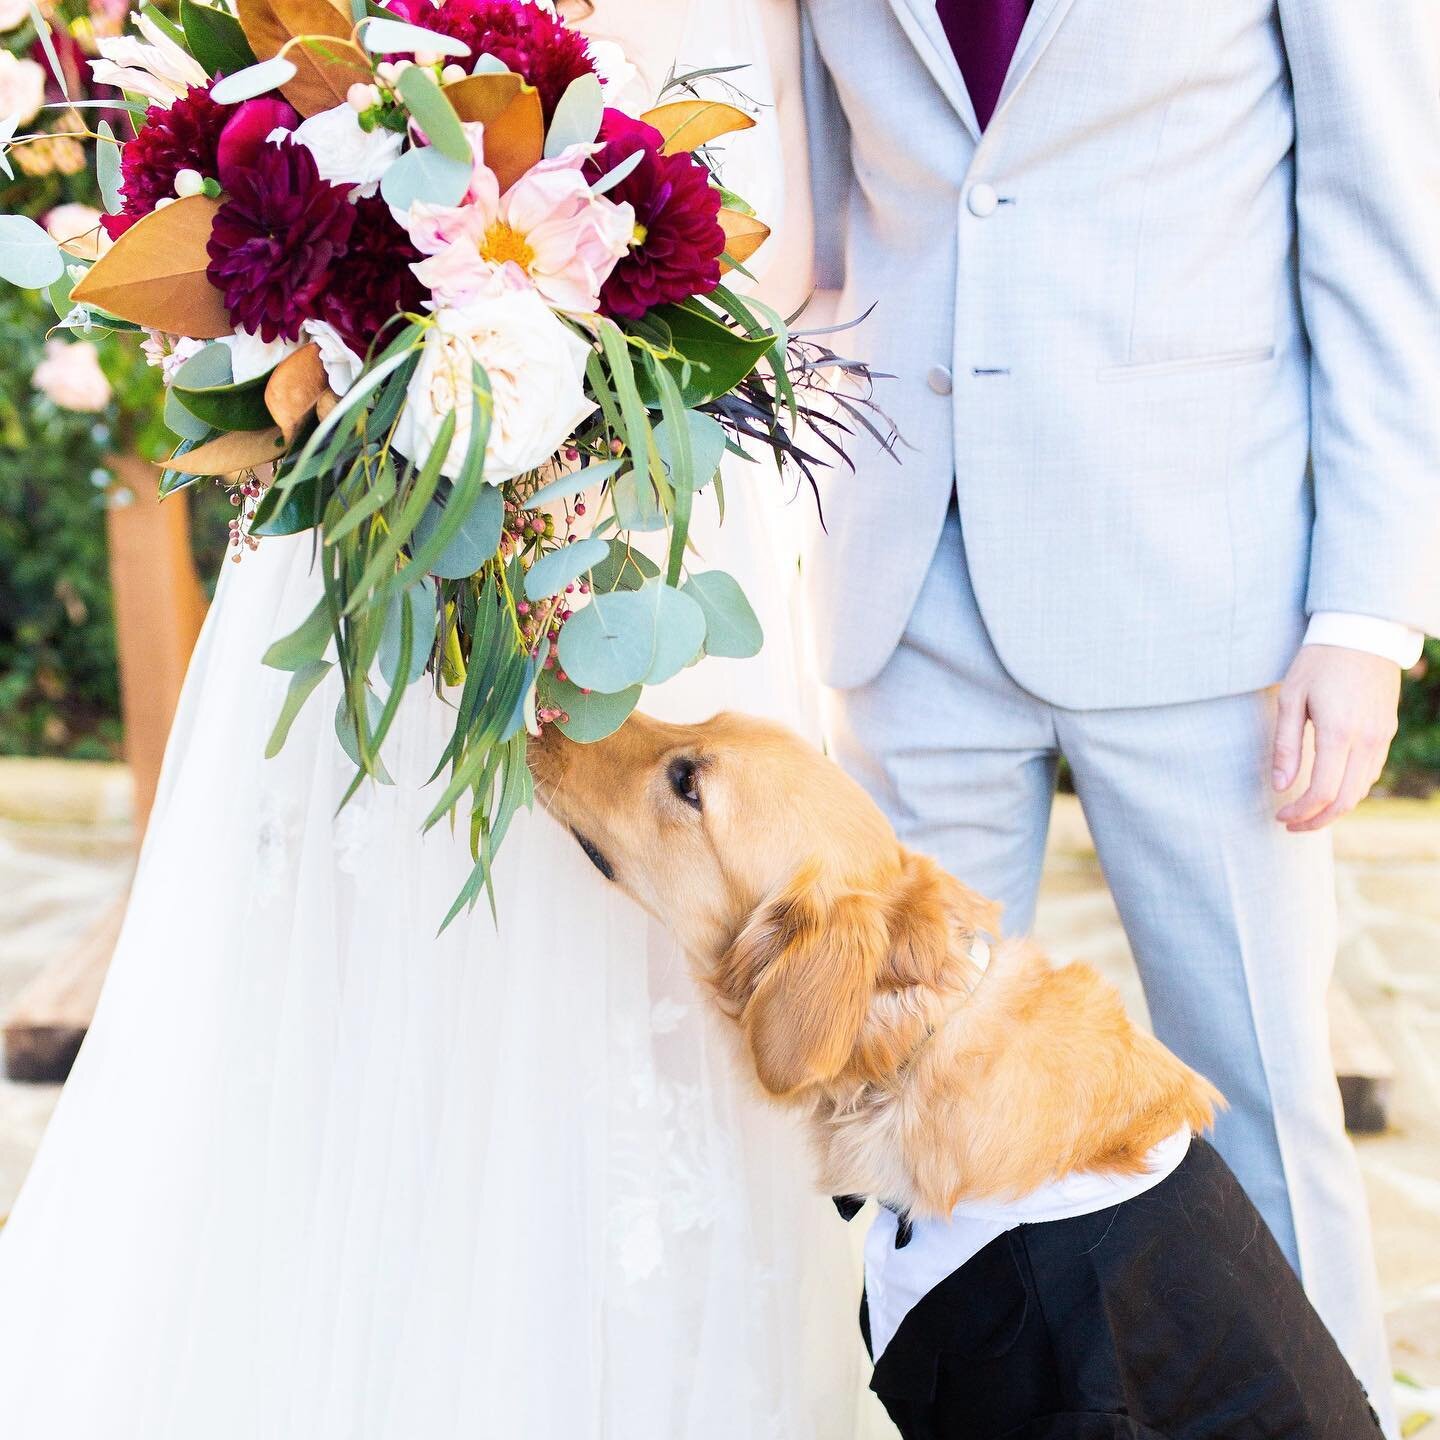 Happy National Dog  Day  @gusandquill were obsessed with their moms bouquet that @theflowergirltx made! I definitely recommend having your dog at your wedding for even just portraits! You can get a day of sitter to take them home after the ceremony